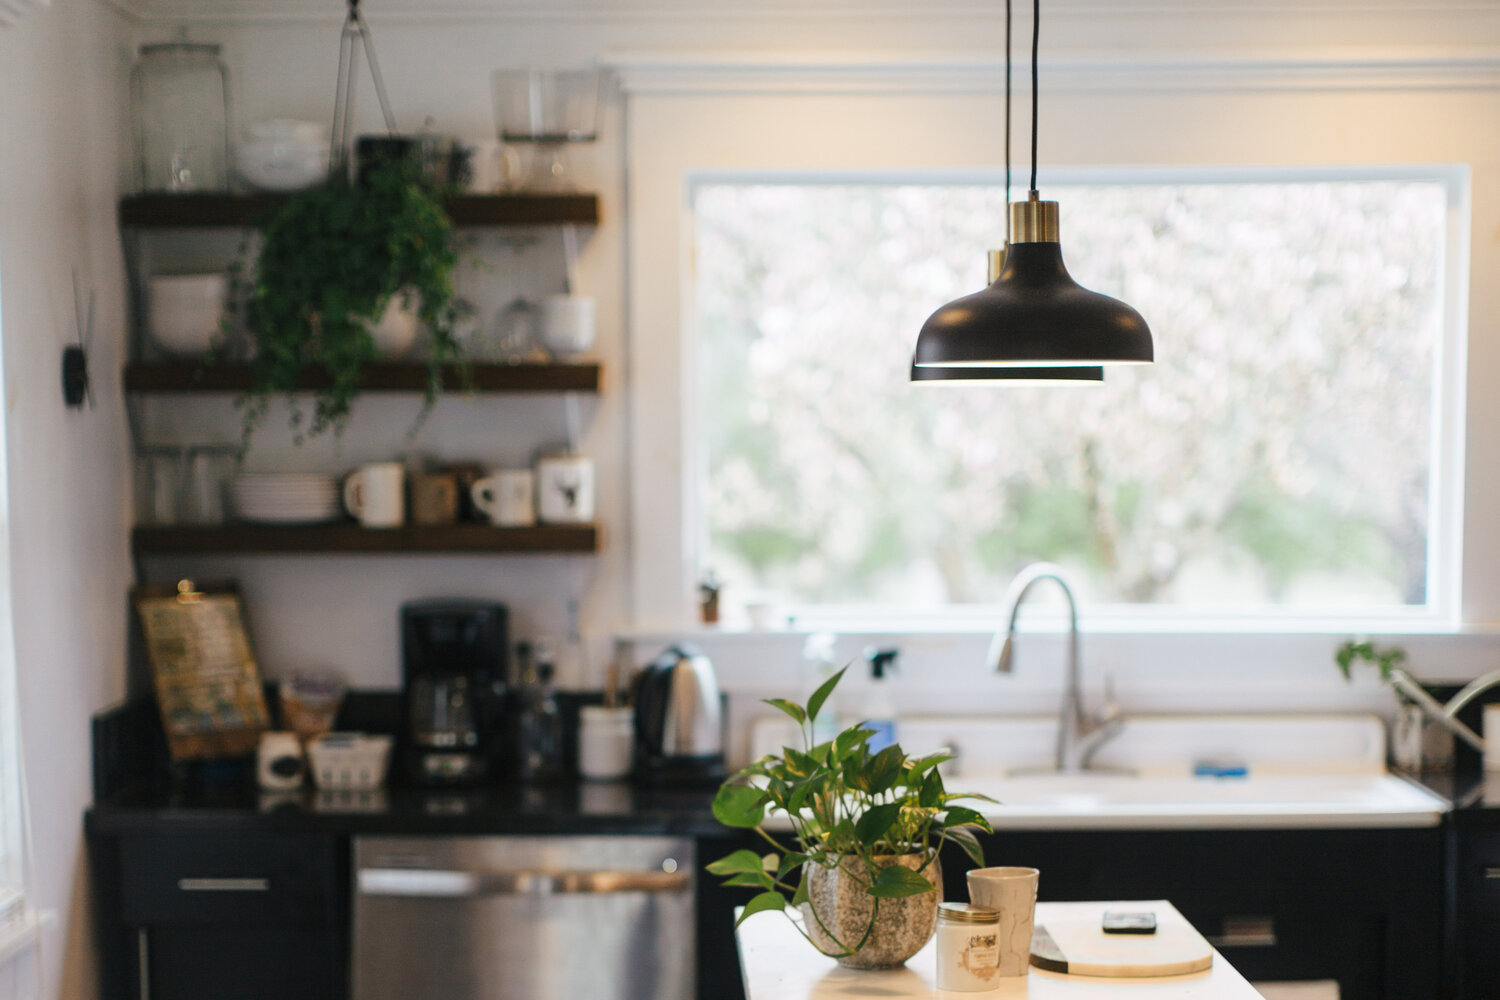 How to Organize Your Kitchen: 7 Ideas You Should Know